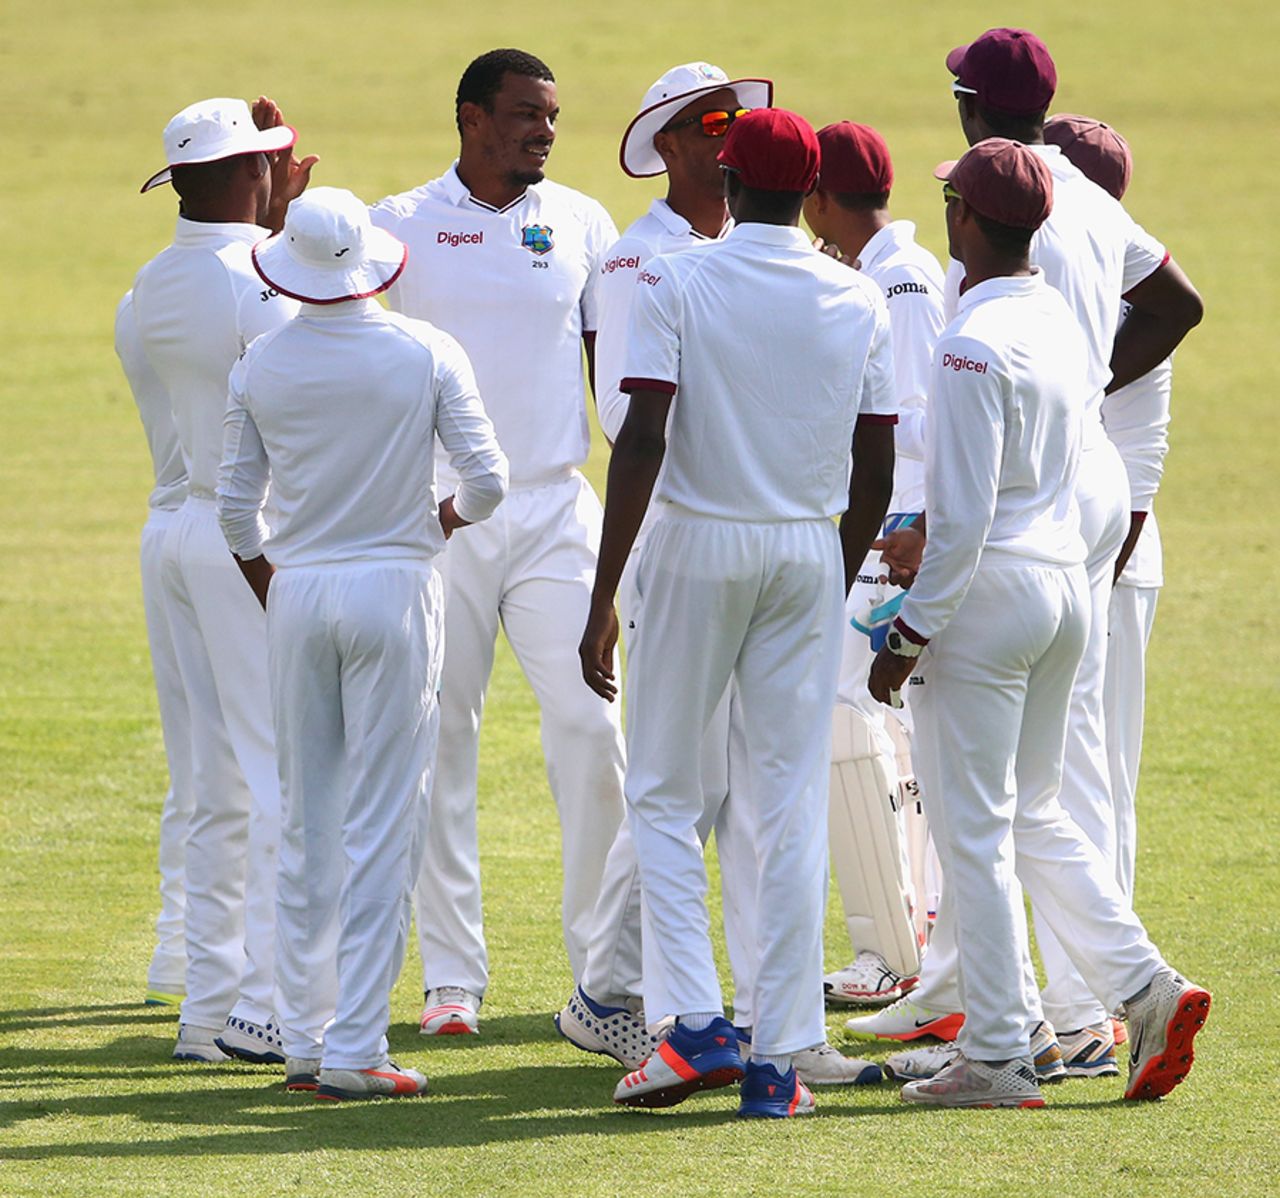 Team-mates surround Shannon Gabriel to celebrate a wicket, Pakistan v West Indies, 3rd Test, Sharjah, 1st day, October 30, 2016